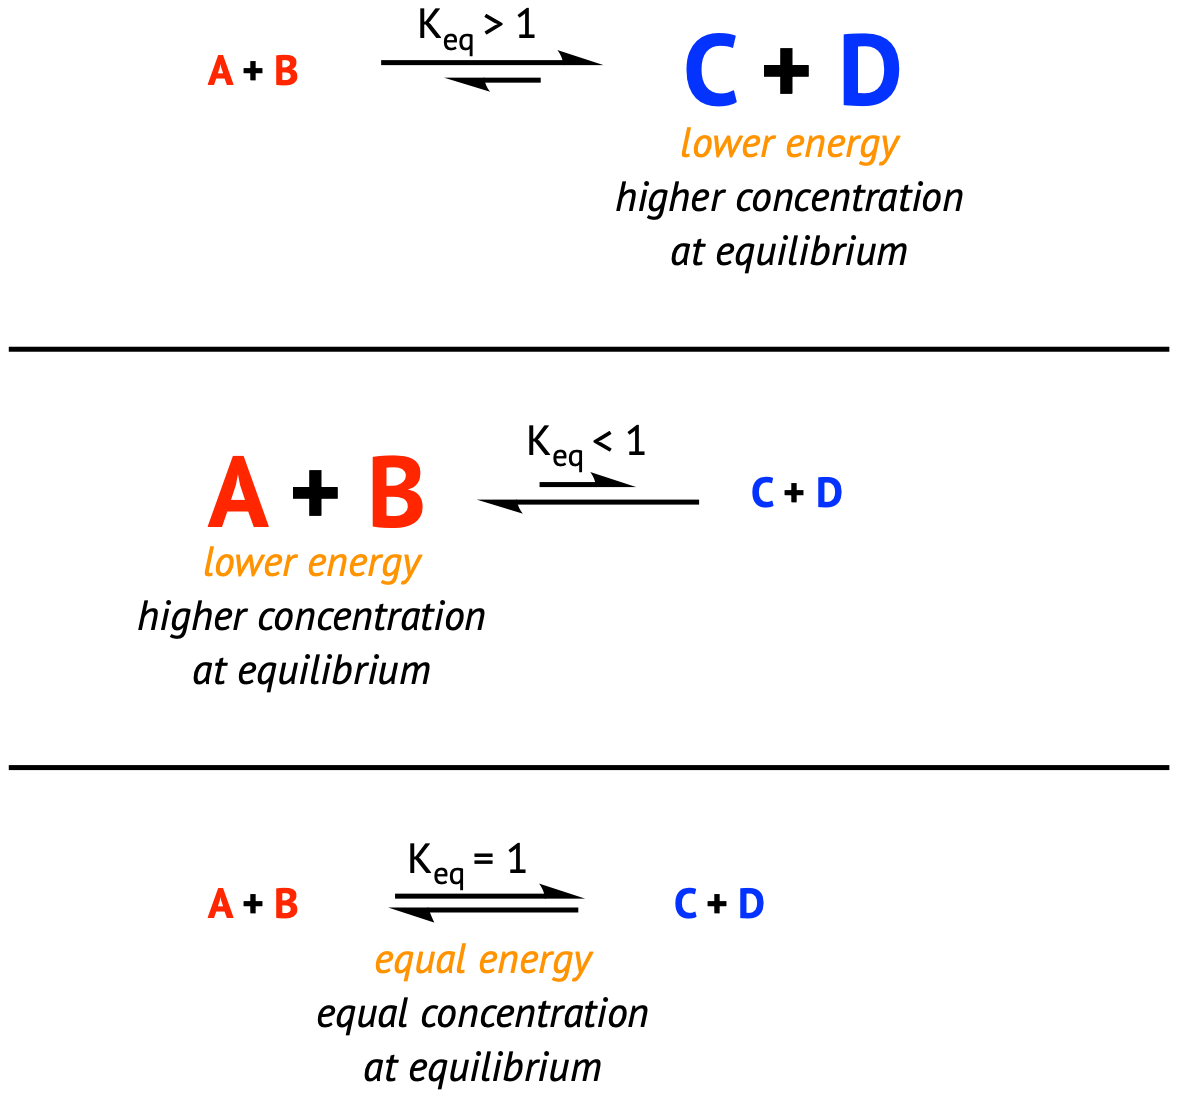 A + B
Keg > 1
A+B
lower energy
higher concentration
at equilibrium
A + B
C + D
lower energy
higher concentration
at equilibrium
Ken<1
eq
Keq = 1
equal energy
equal concentration
at equilibrium
C + D
C+D